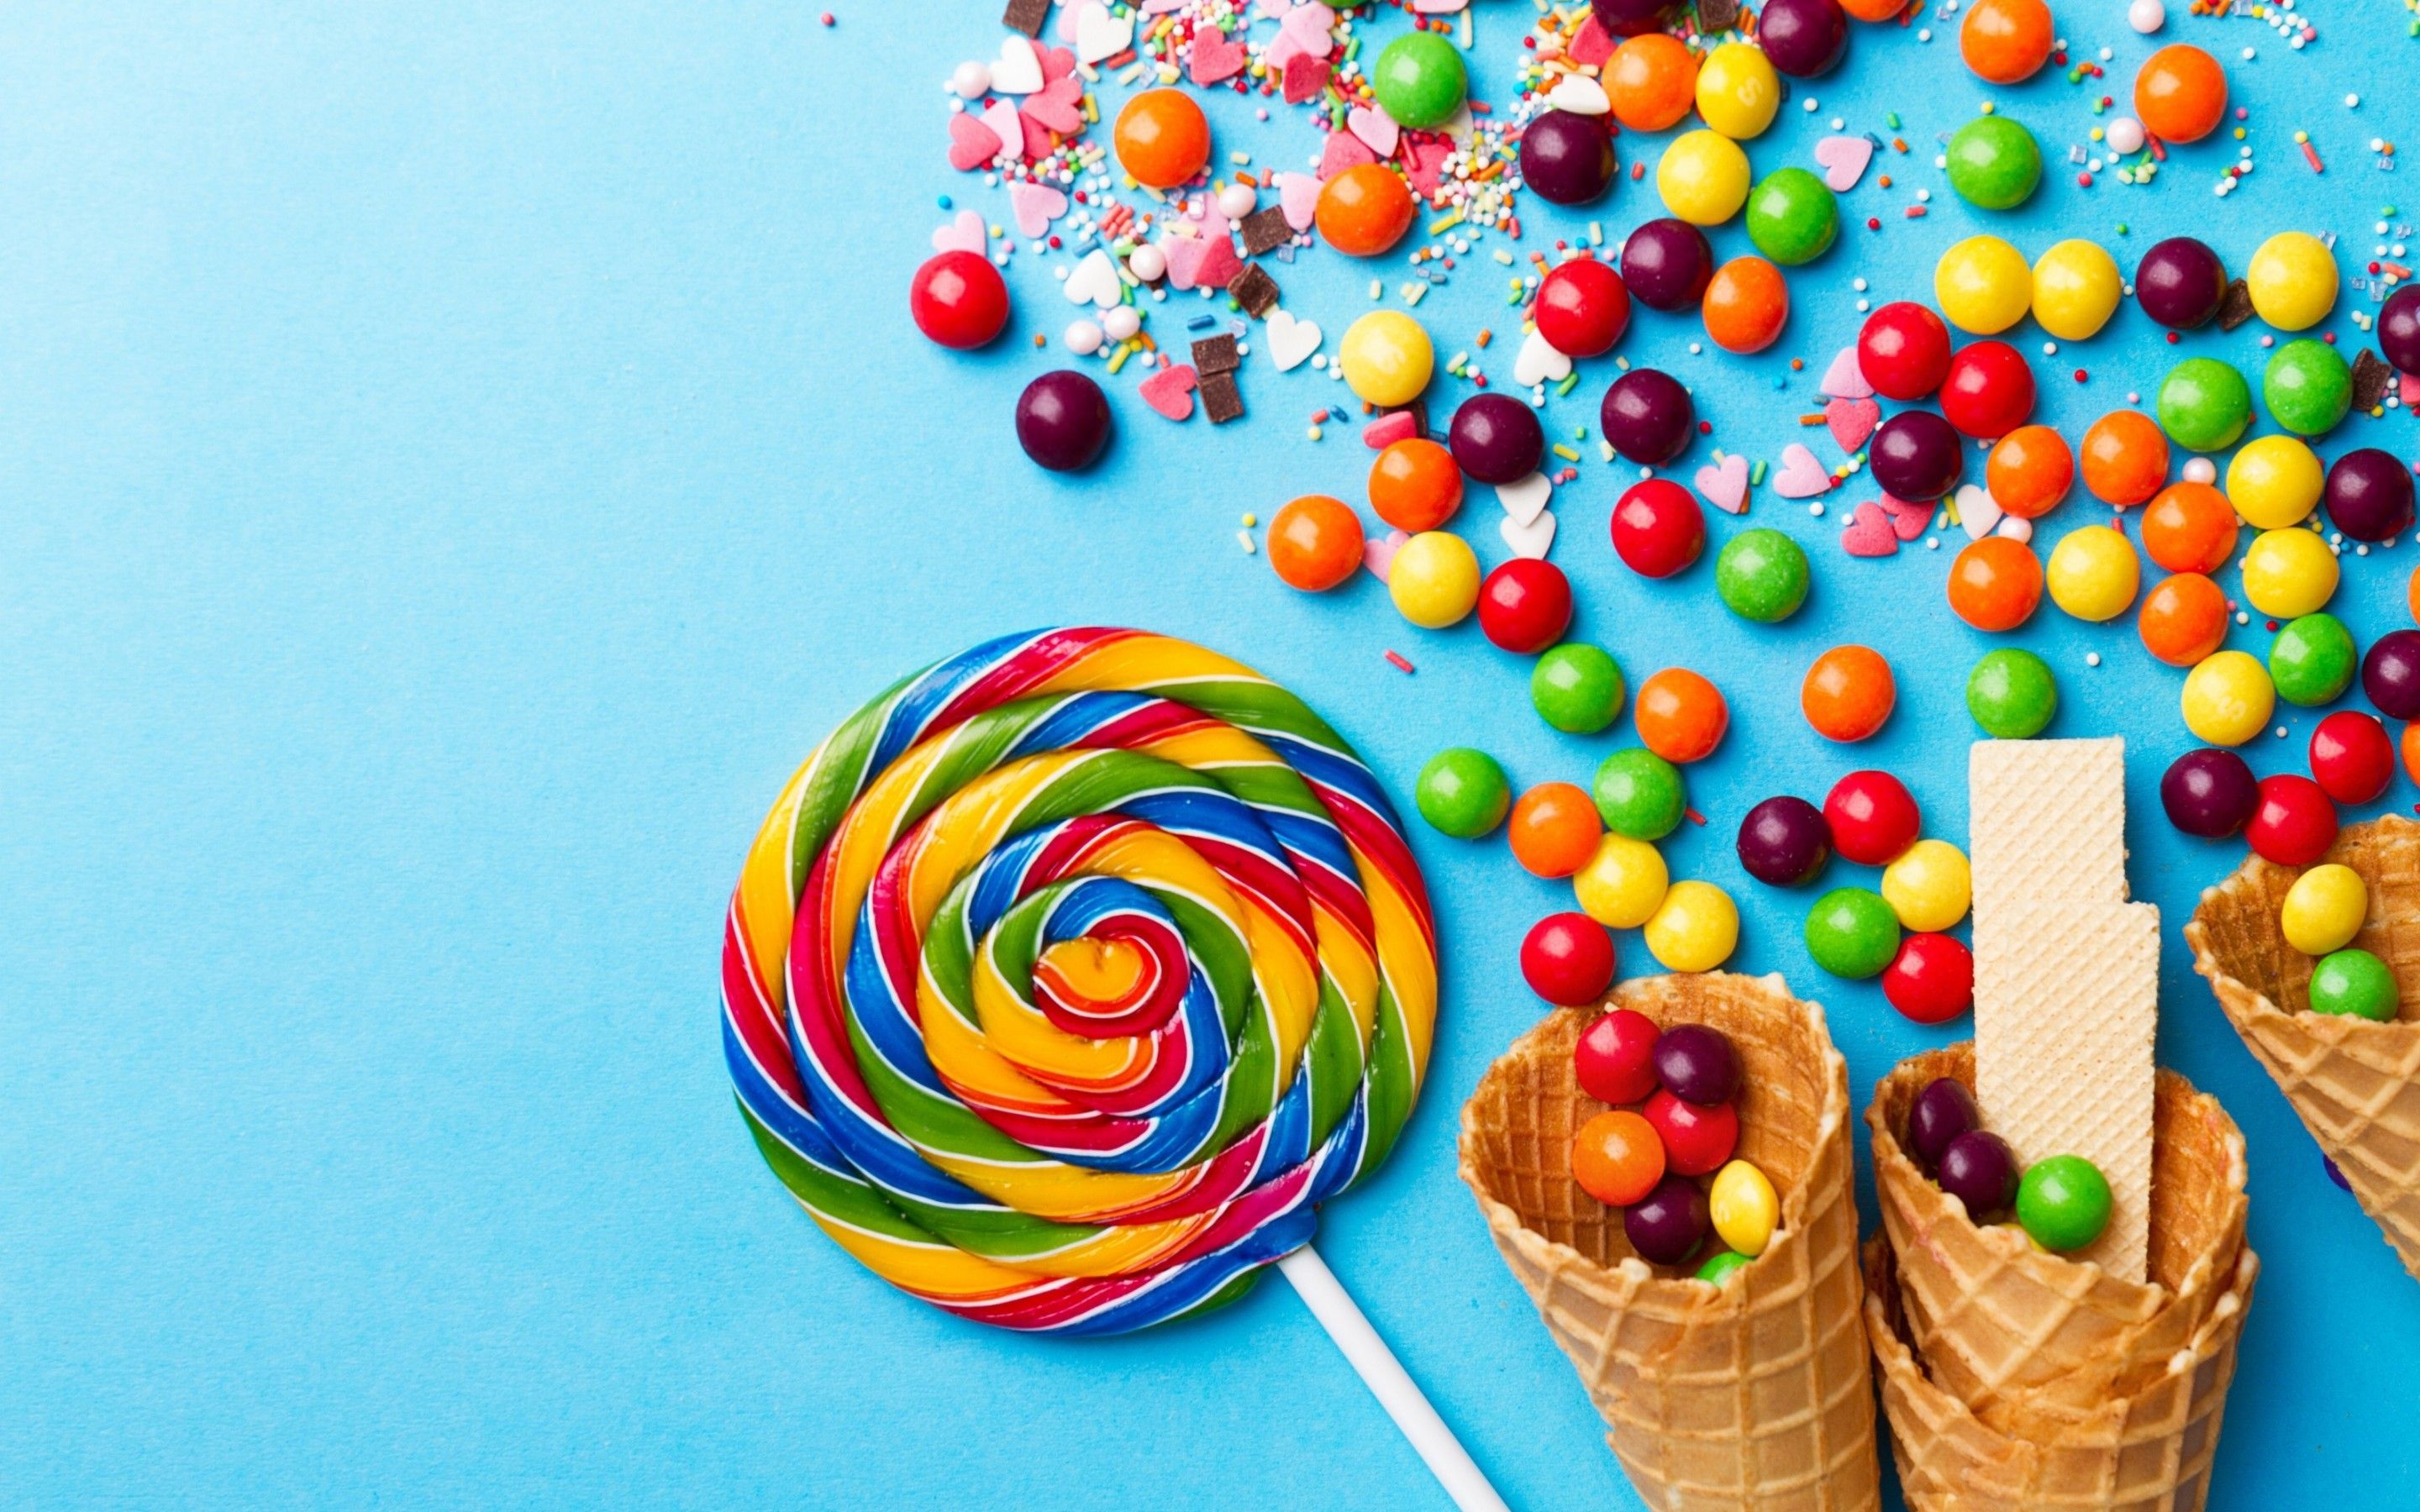 Download 2880x1800 Waffle Cone, Candy, Lollipop Wallpaper